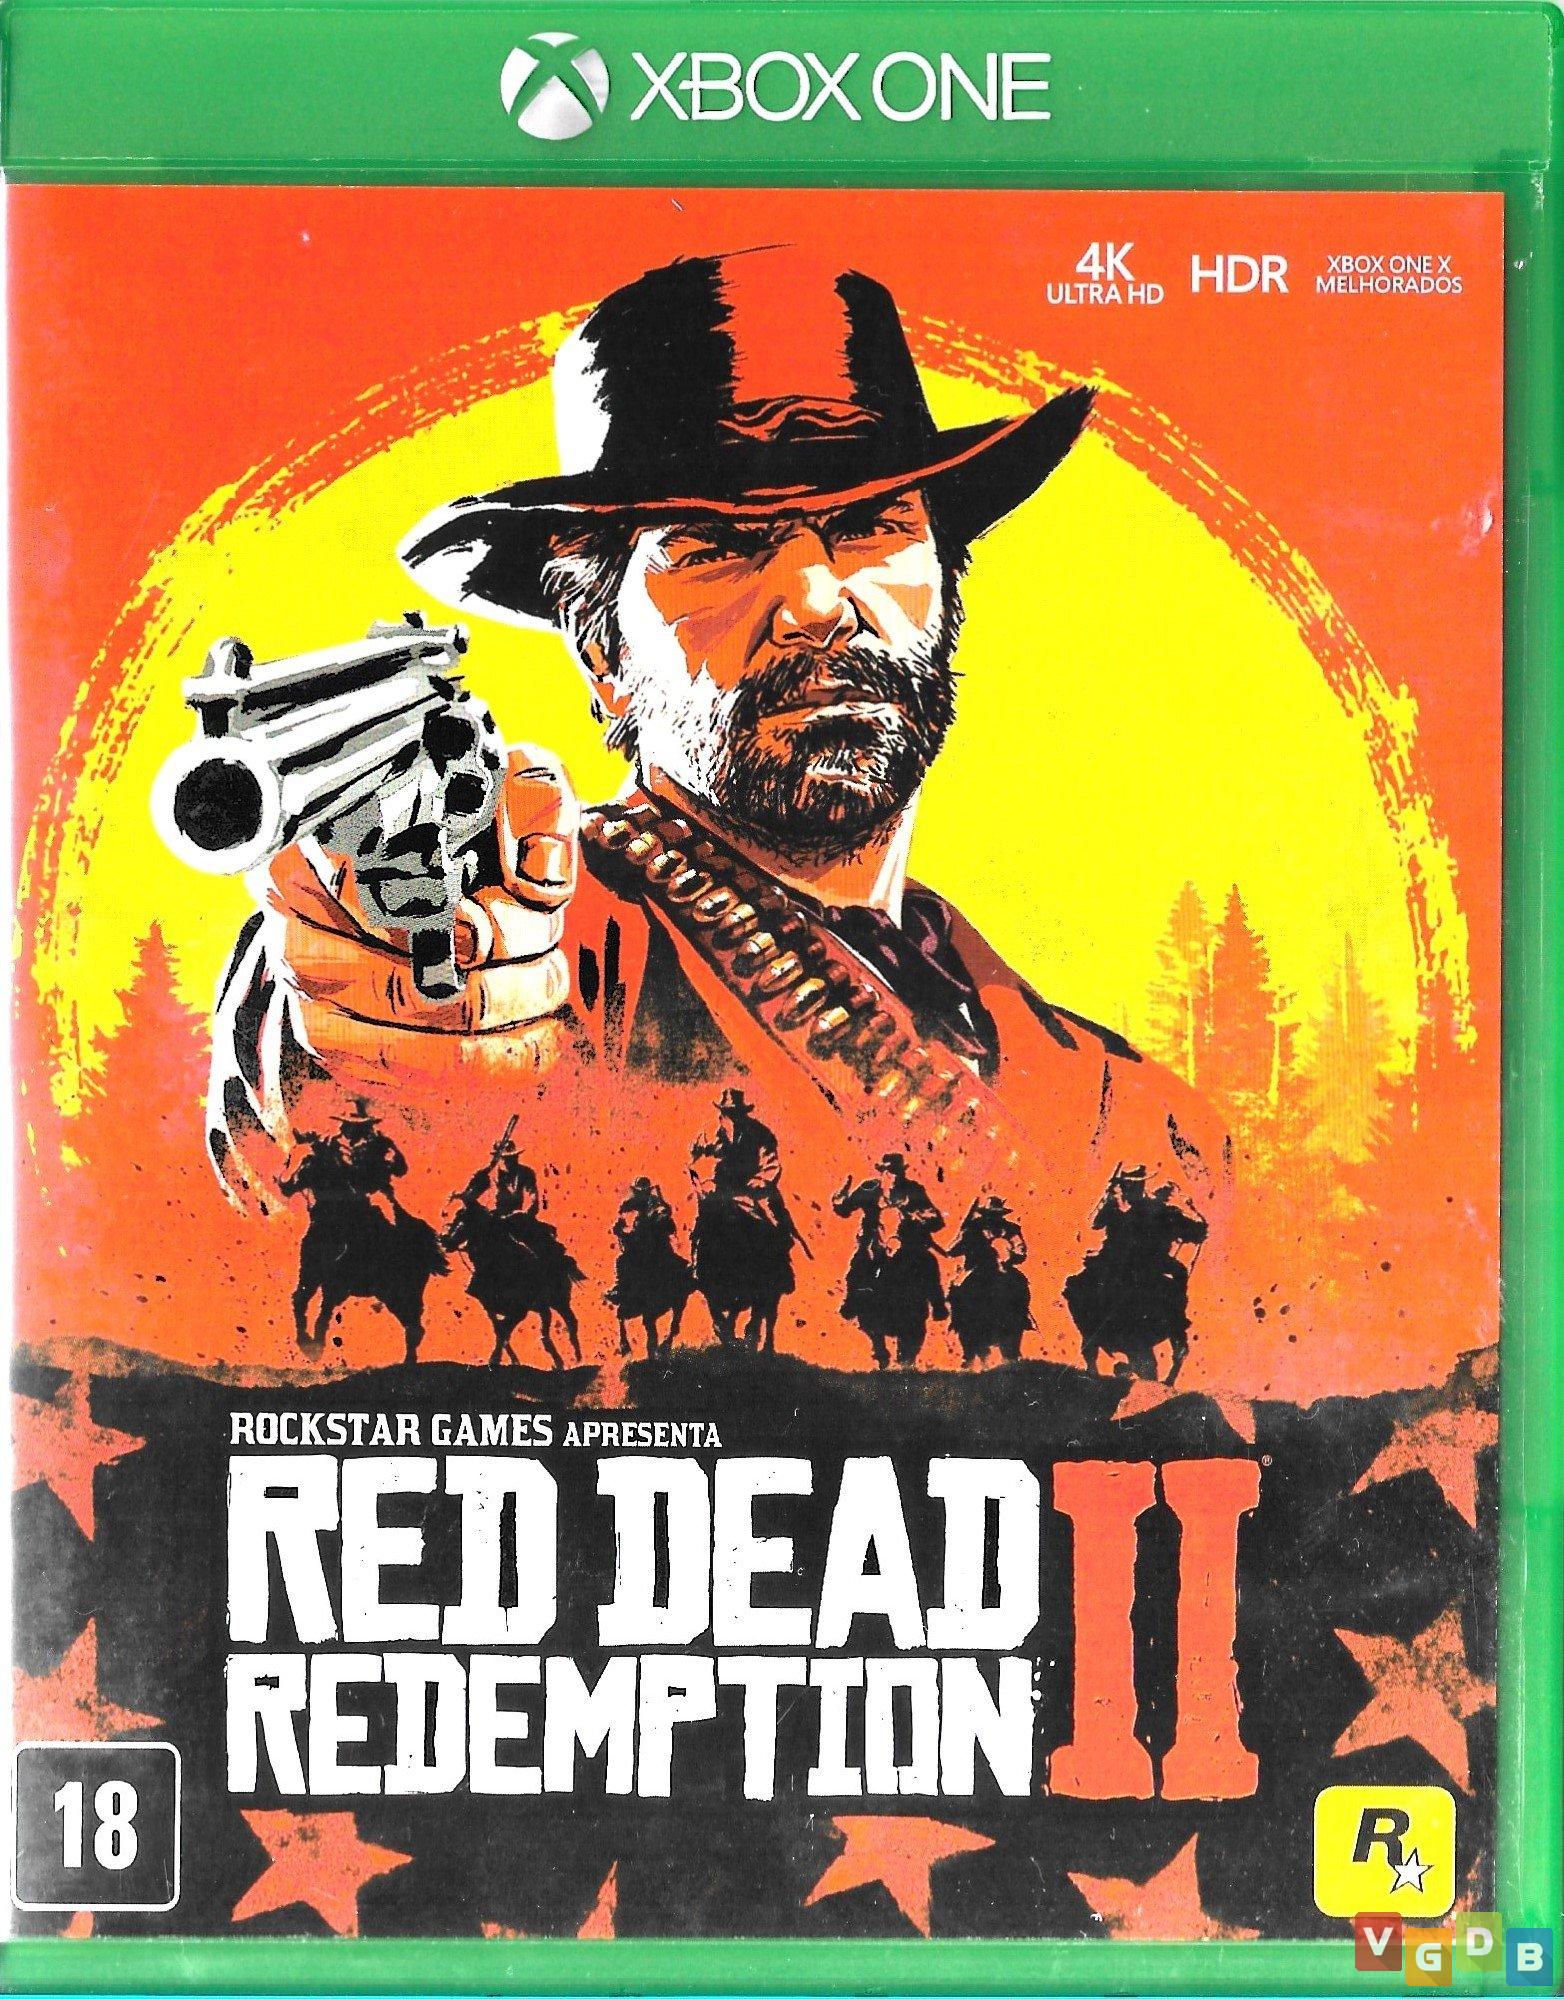 Red Dead Redemption II 2 Xbox One Special Edition 710425498916